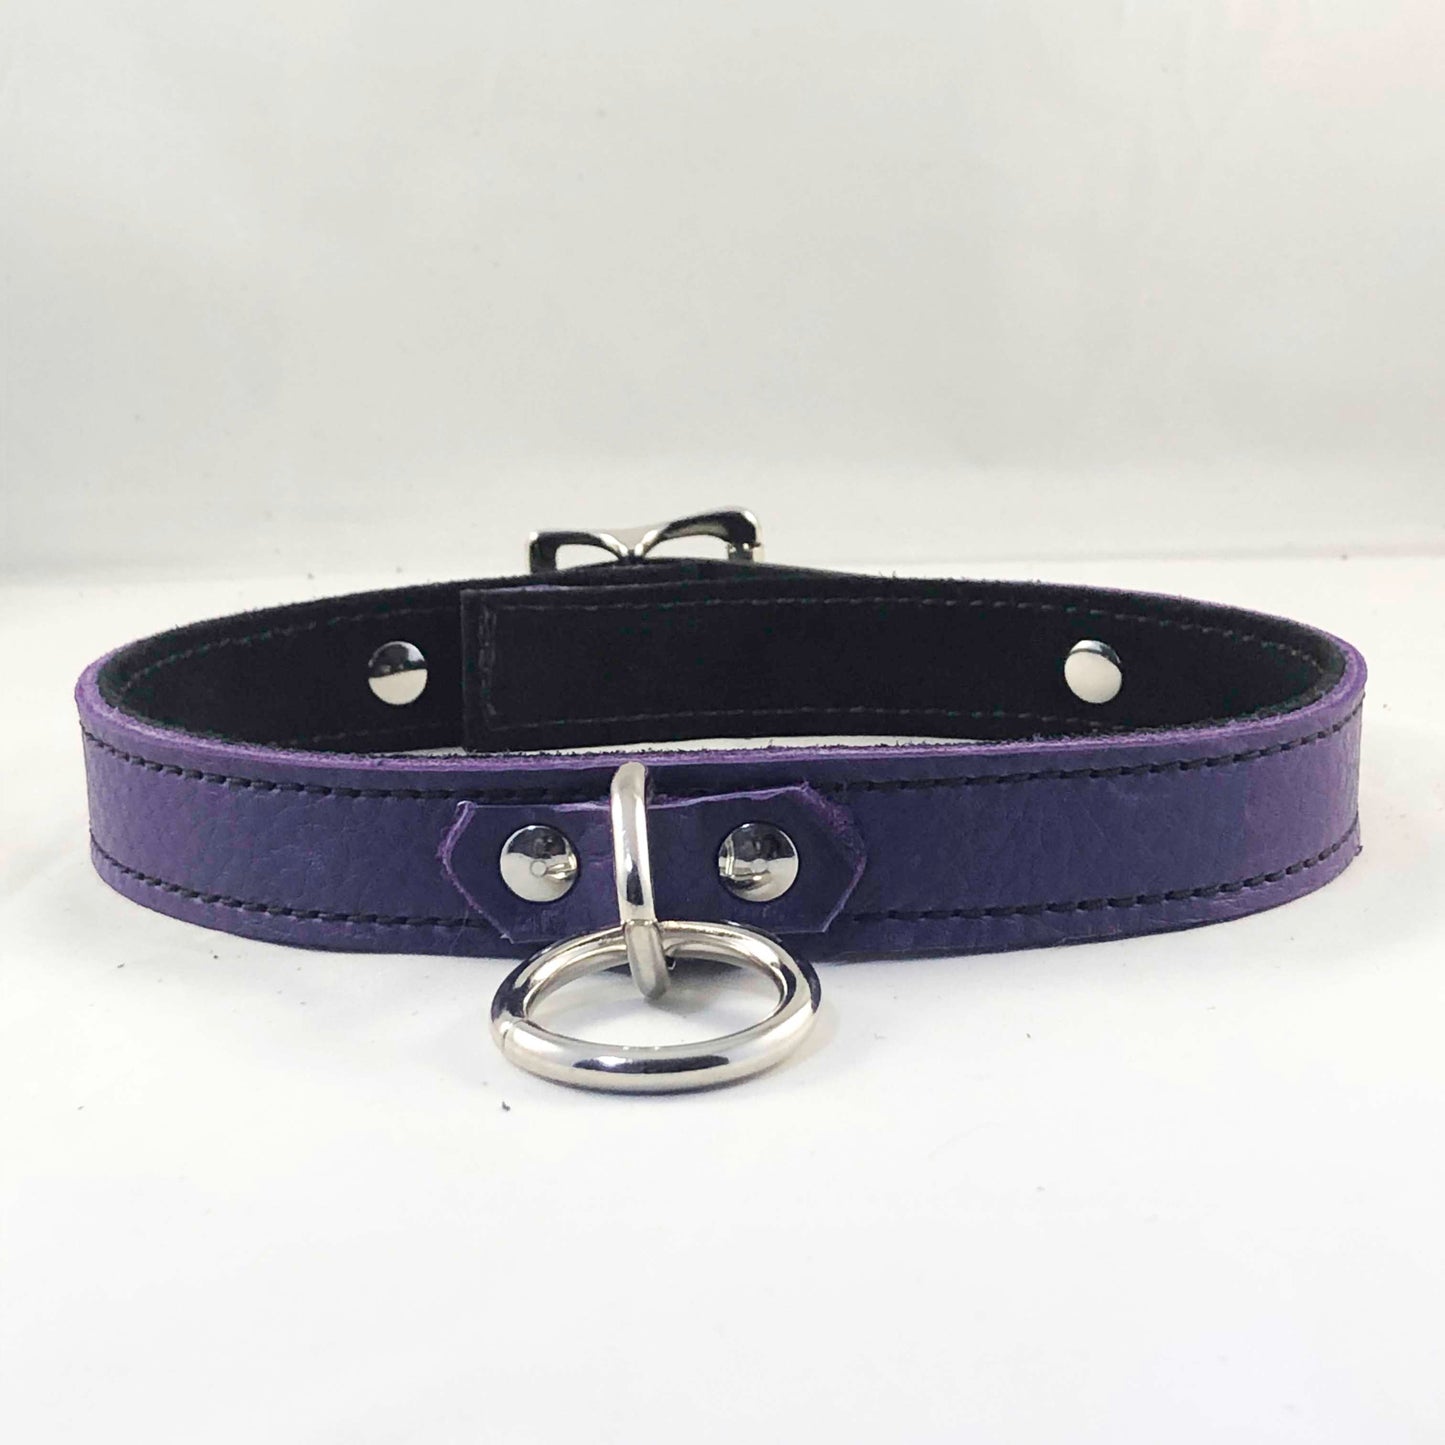 The front view of the purple Basic Single Ring Collar.